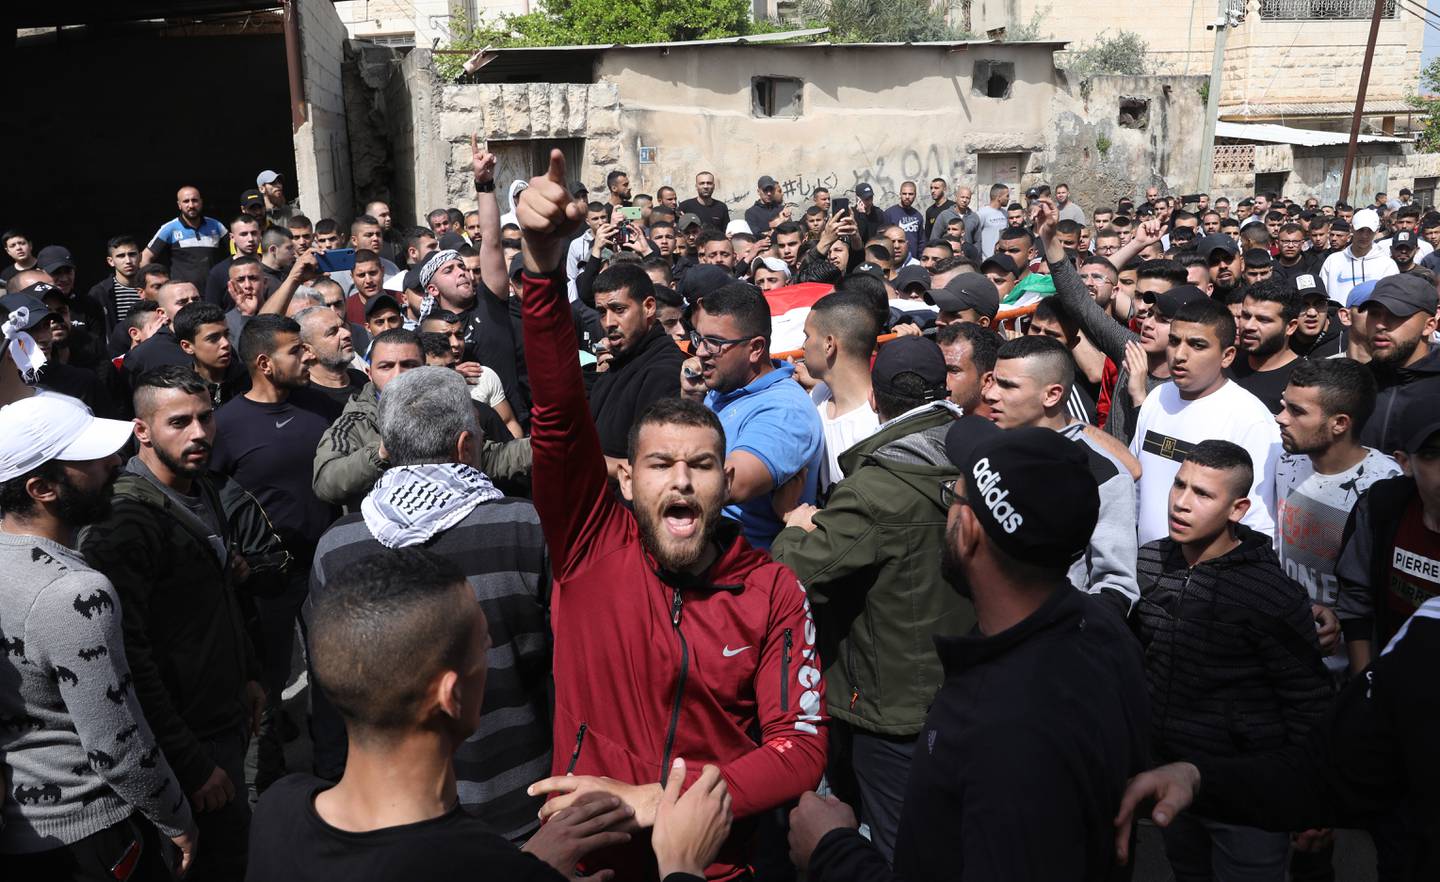 Palestinians carry the body of Mohamed Zakarneh, 17, during his funeral in the West Bank city of Jenin on April 11. EPA